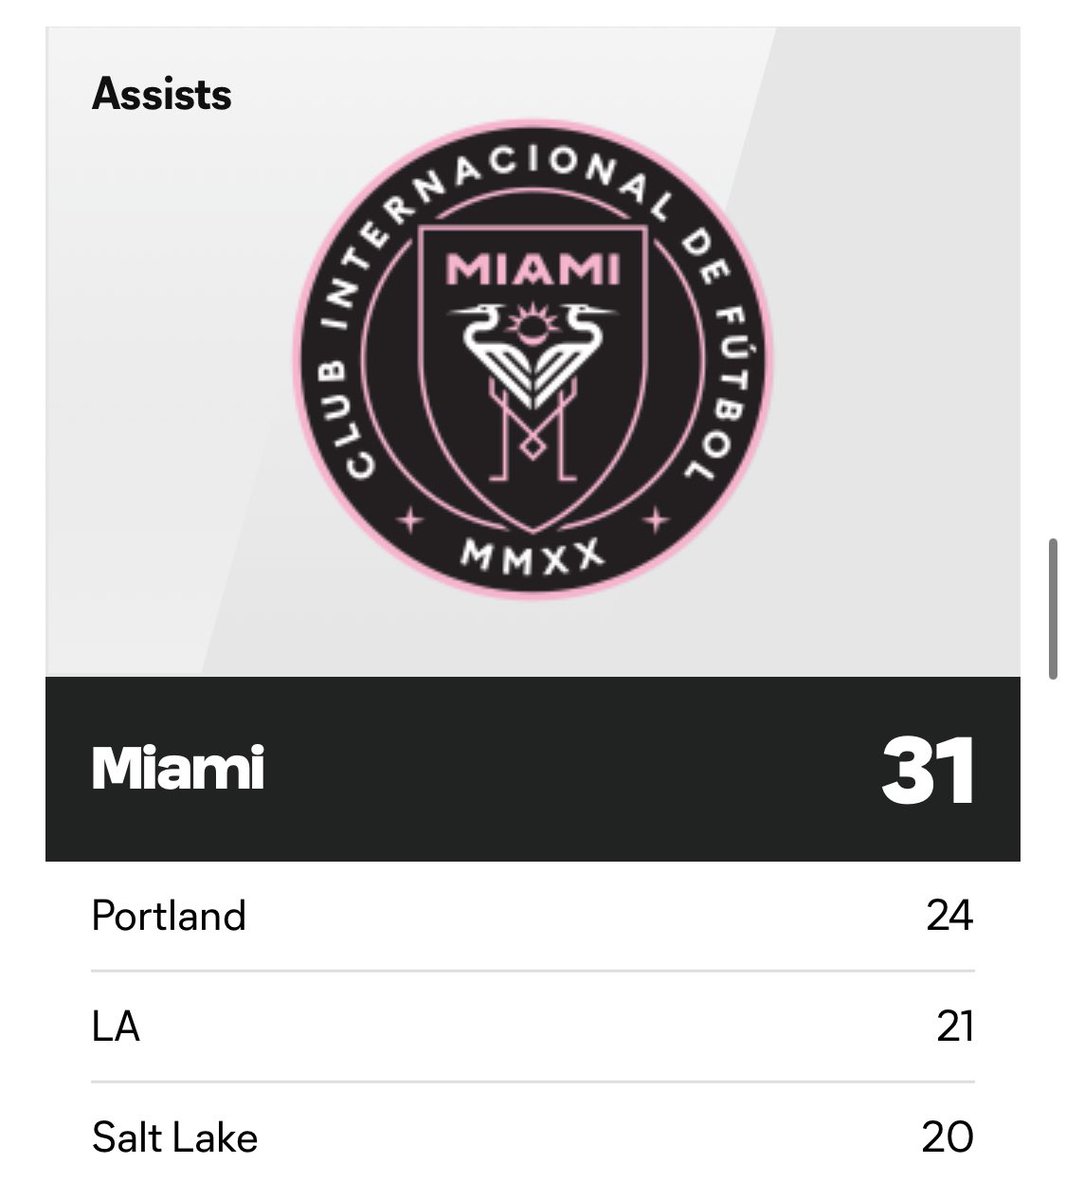 MLS Leaders 💪 

📈#InterMiamiCF lead the league in both goals and assists this season. 

📊#Messi tops the charts for the Herons in both categories with 7 goals and 6 assists, while Suarez and Gomez follow suit notching 6 goals and 5 assists respectively.